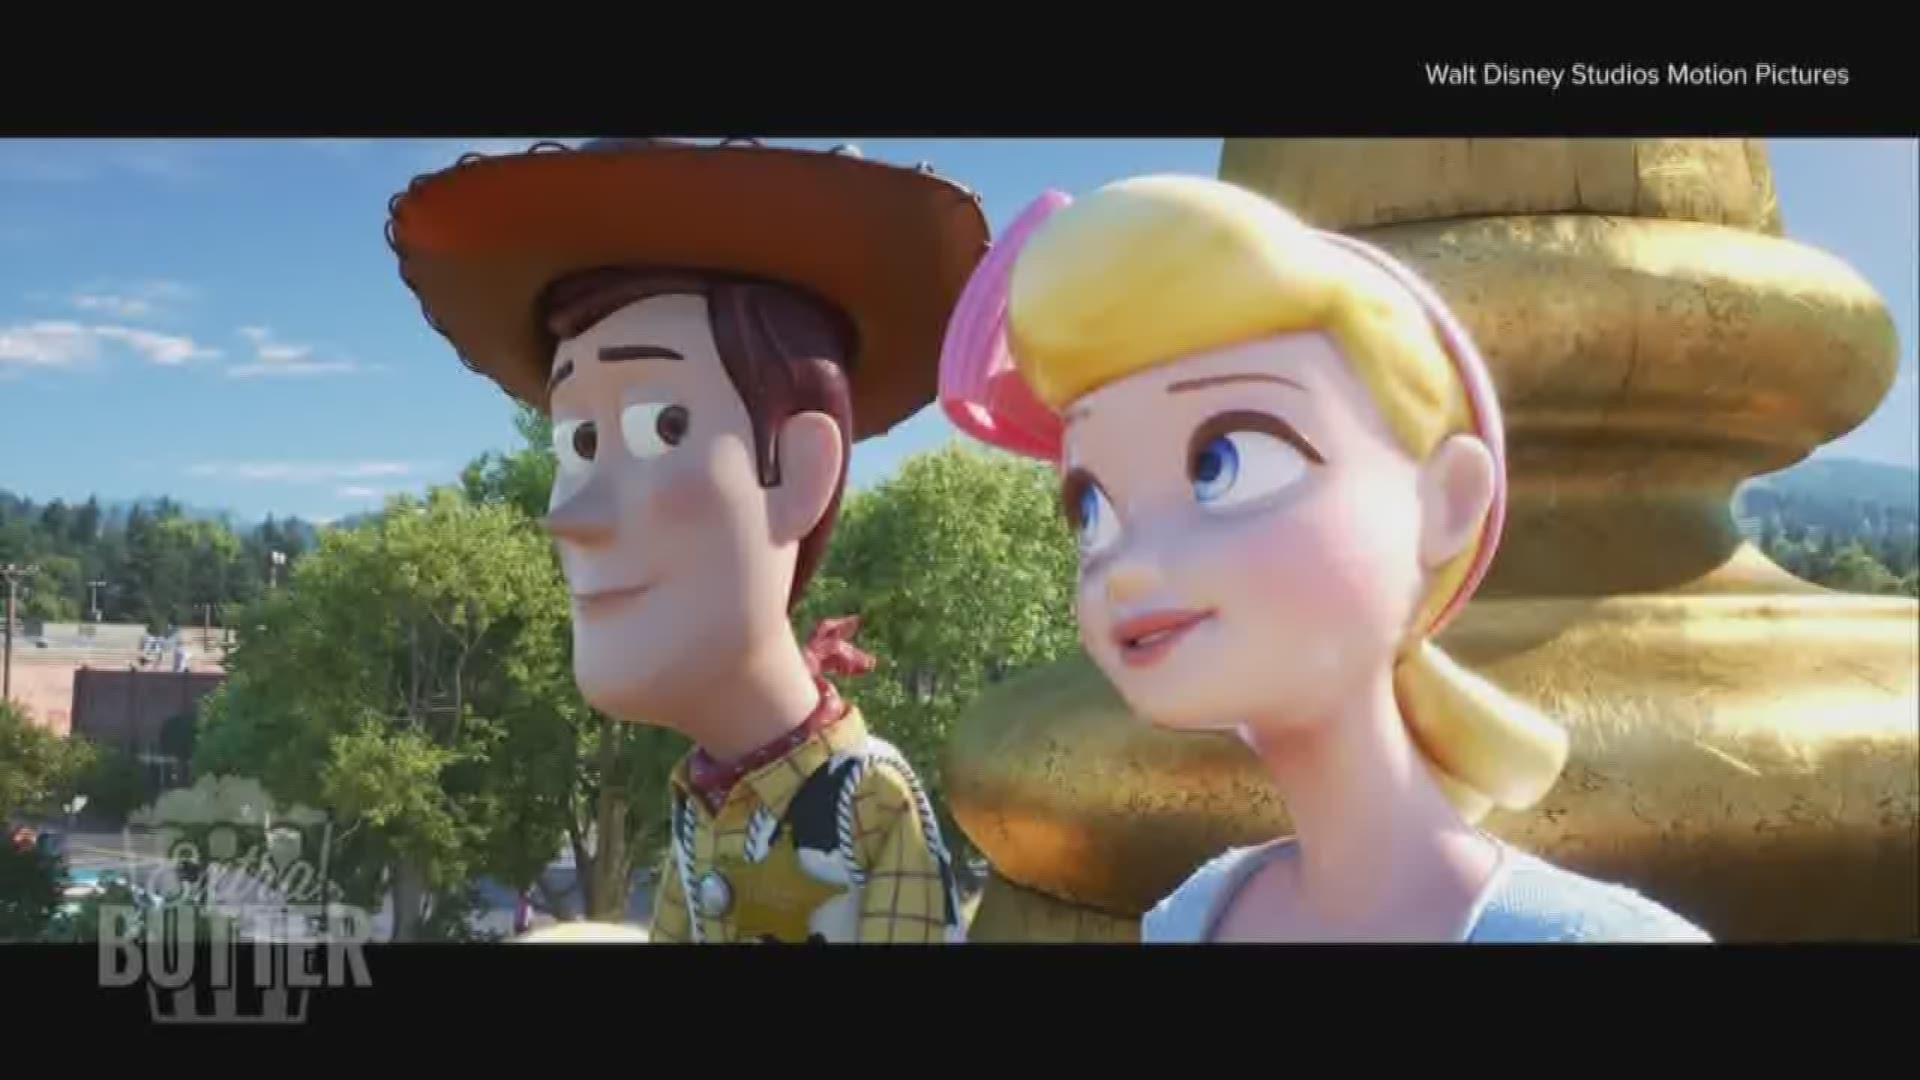 Extra Butter sits down with Valerie LaPointe, story supervisor for 'Toy Story 4.' Valerie talks about her favorite characters and the rise of Bo Peep in the new movie.